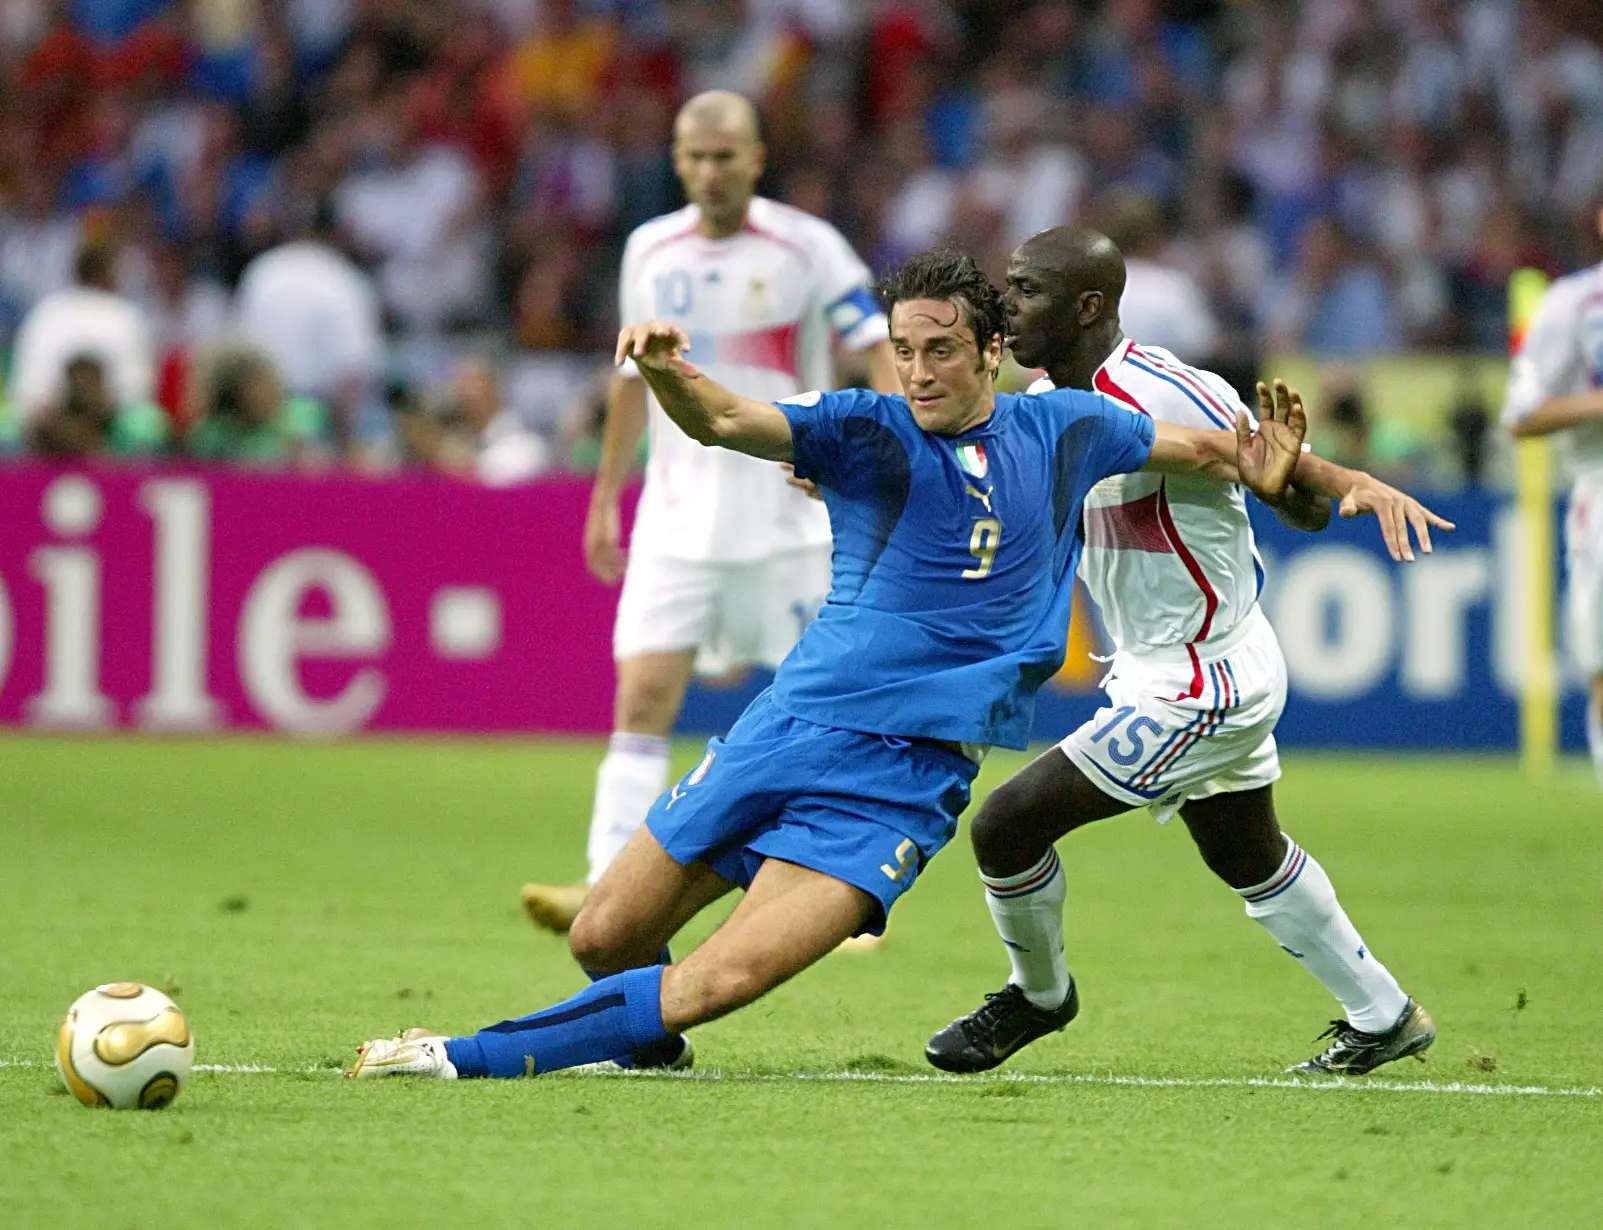 Luca Toni was part of the Italy team which won the 2006 World Cup